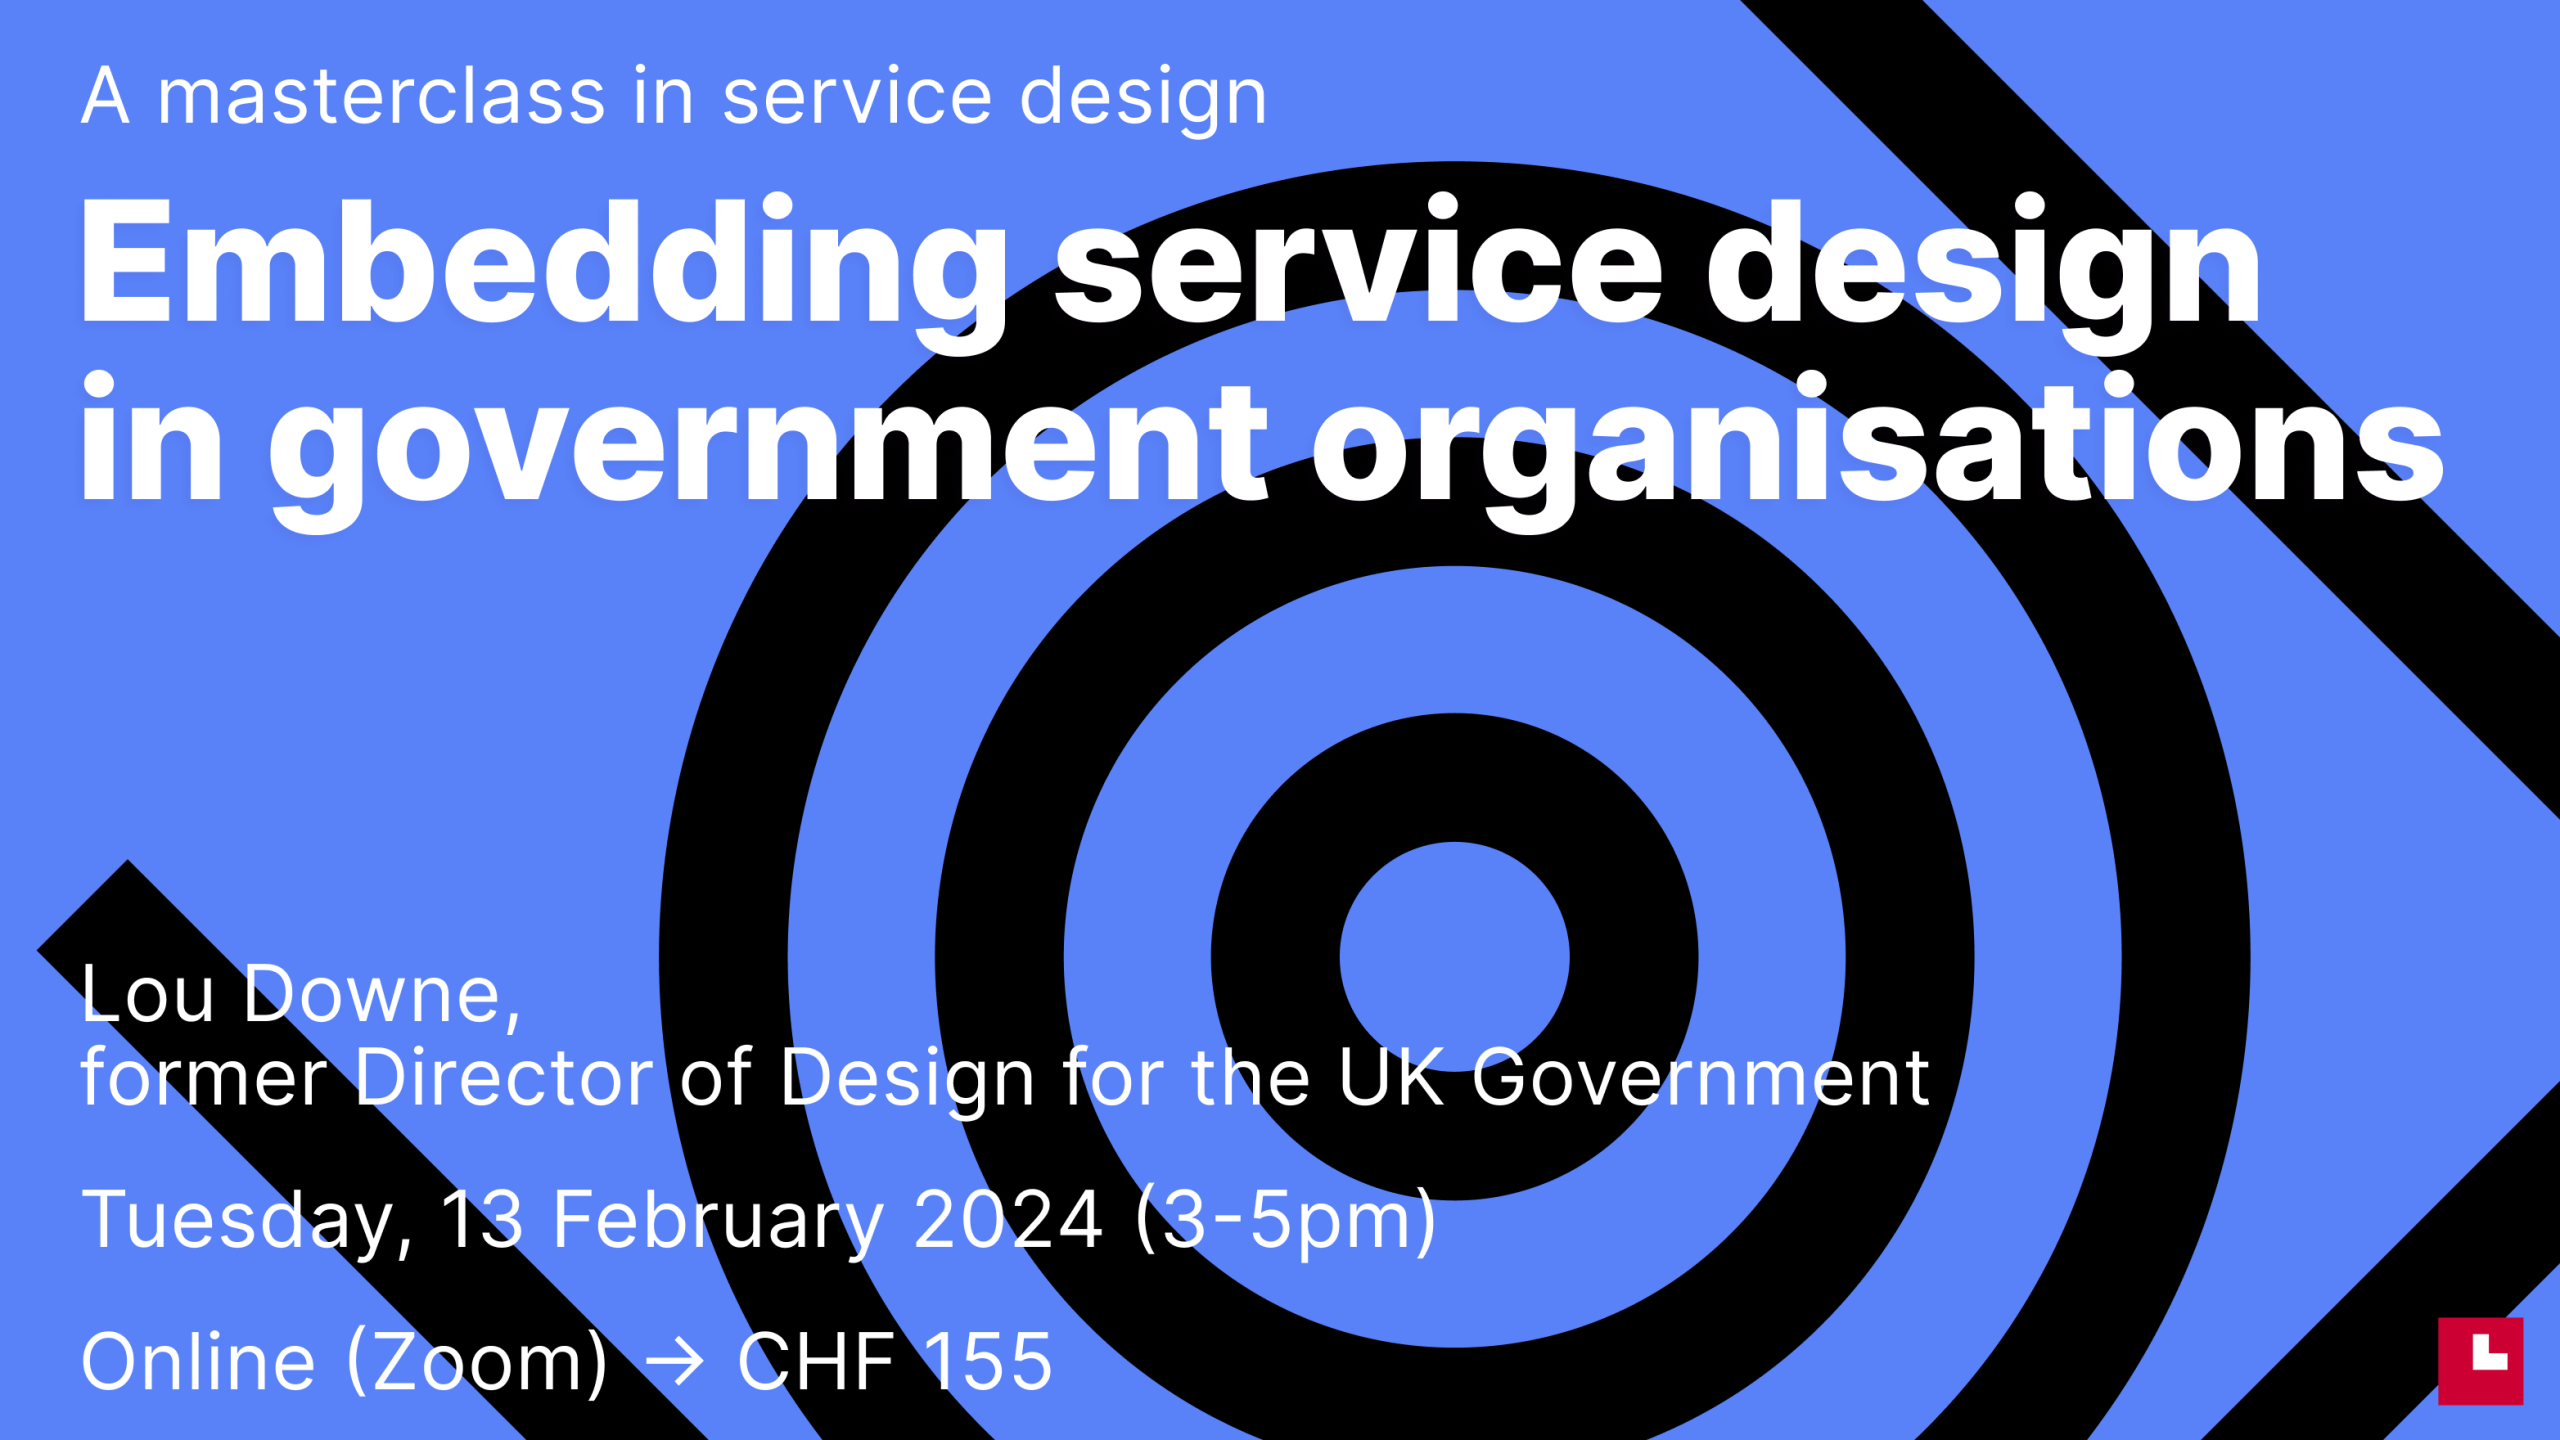 Masterclass in Service Design with Lou Downe